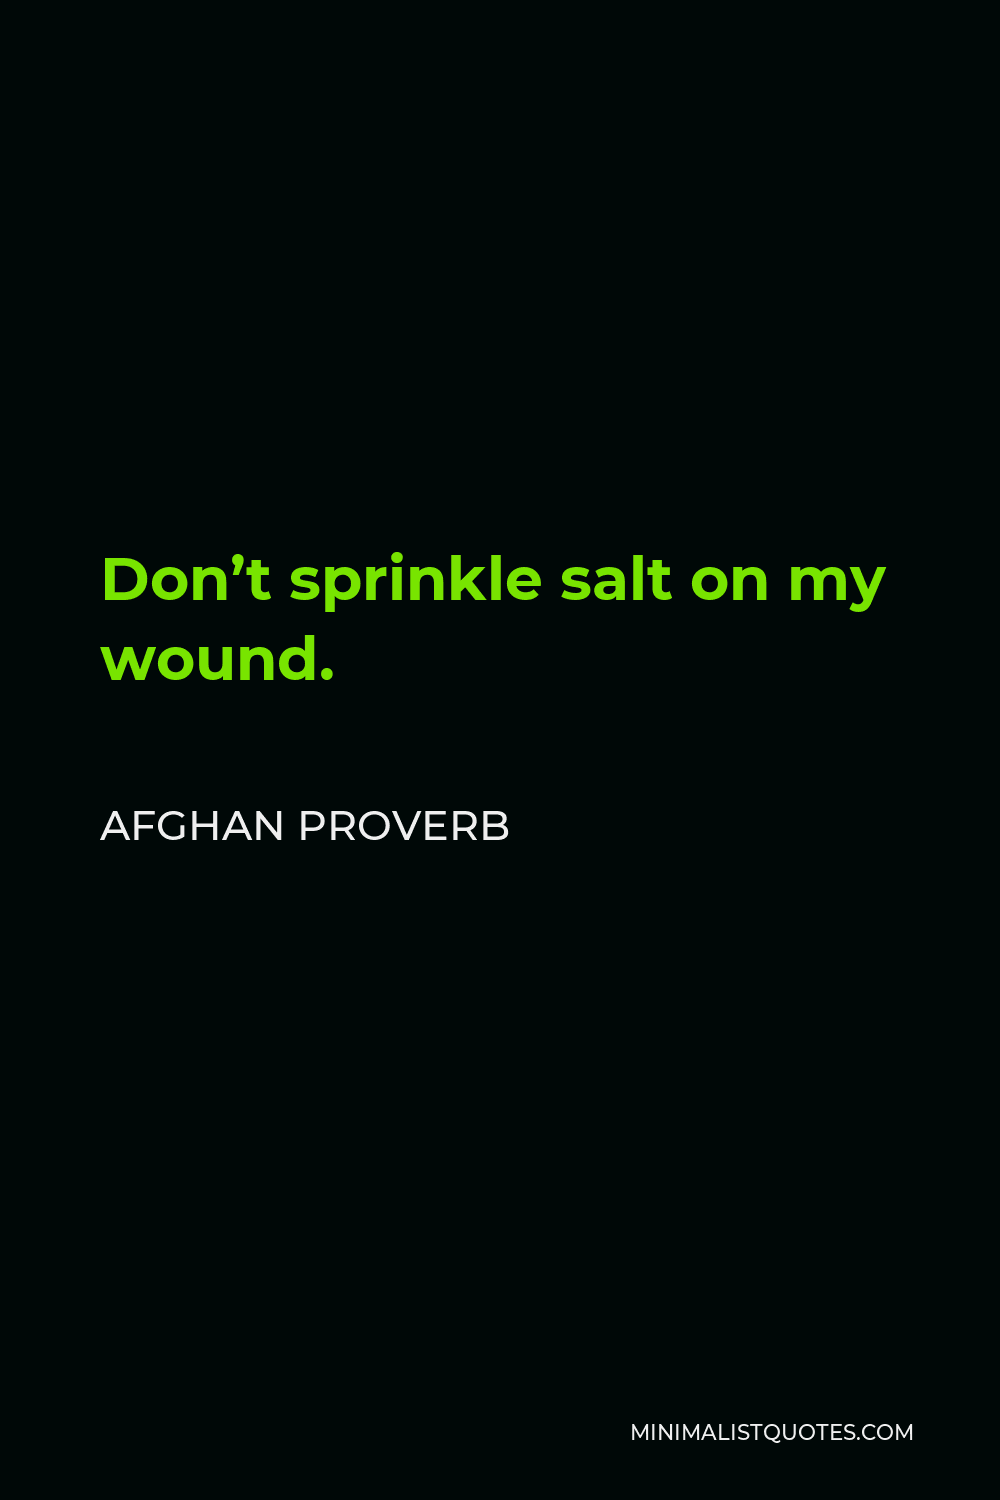 Afghan Proverb Quote - Don’t sprinkle salt on my wound.